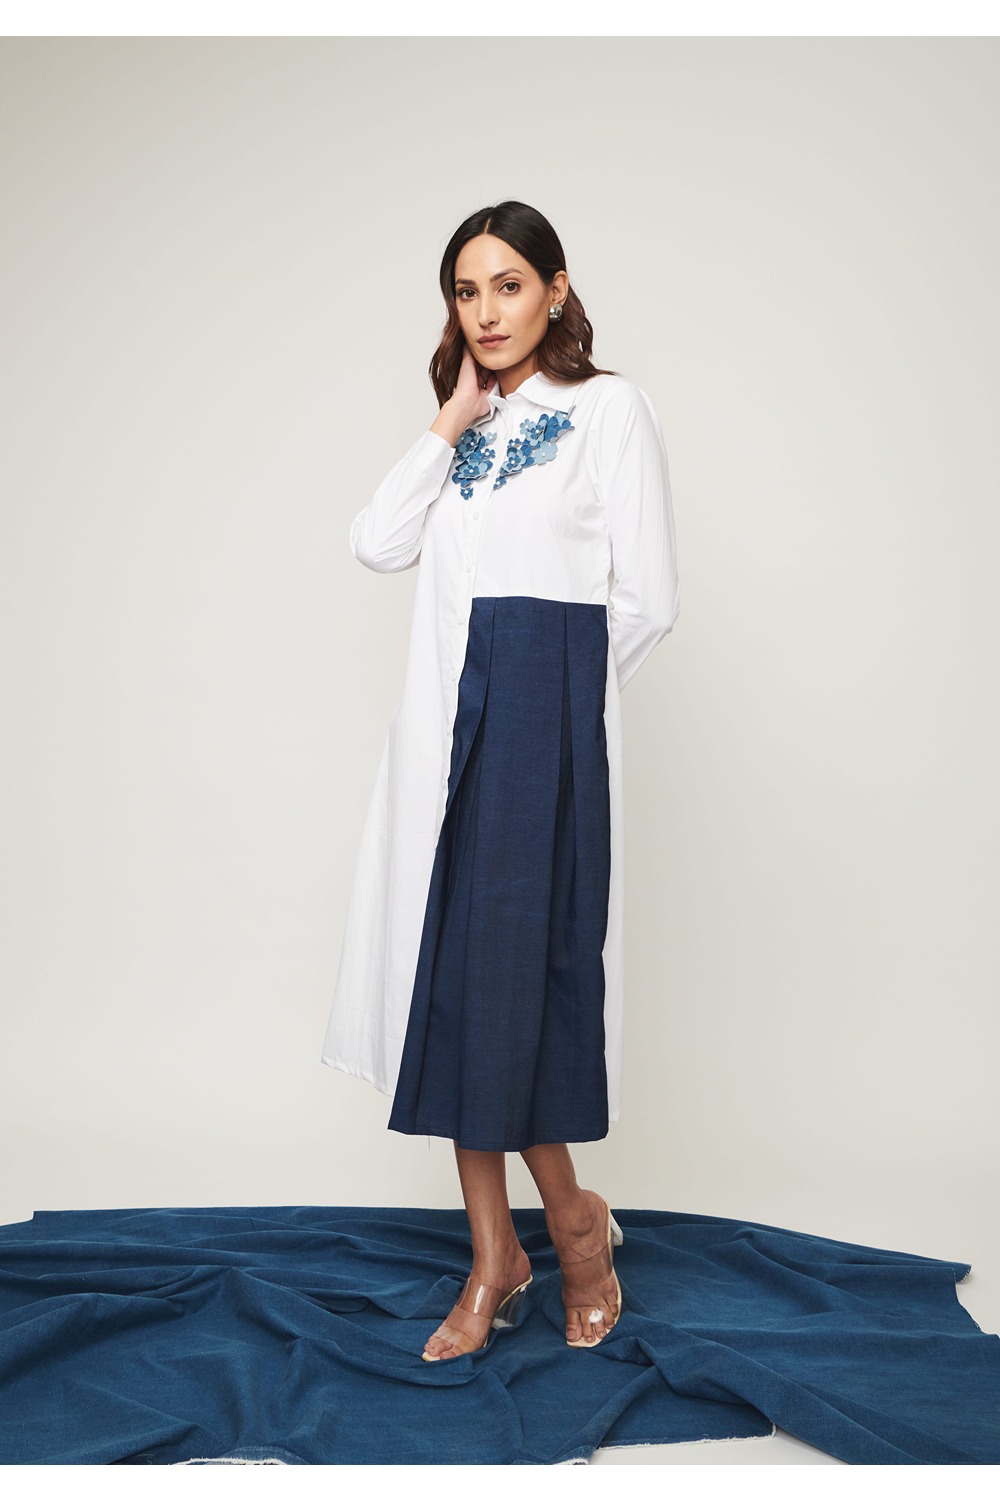 Weaving Cult White Button Down Dress With Denim Panel